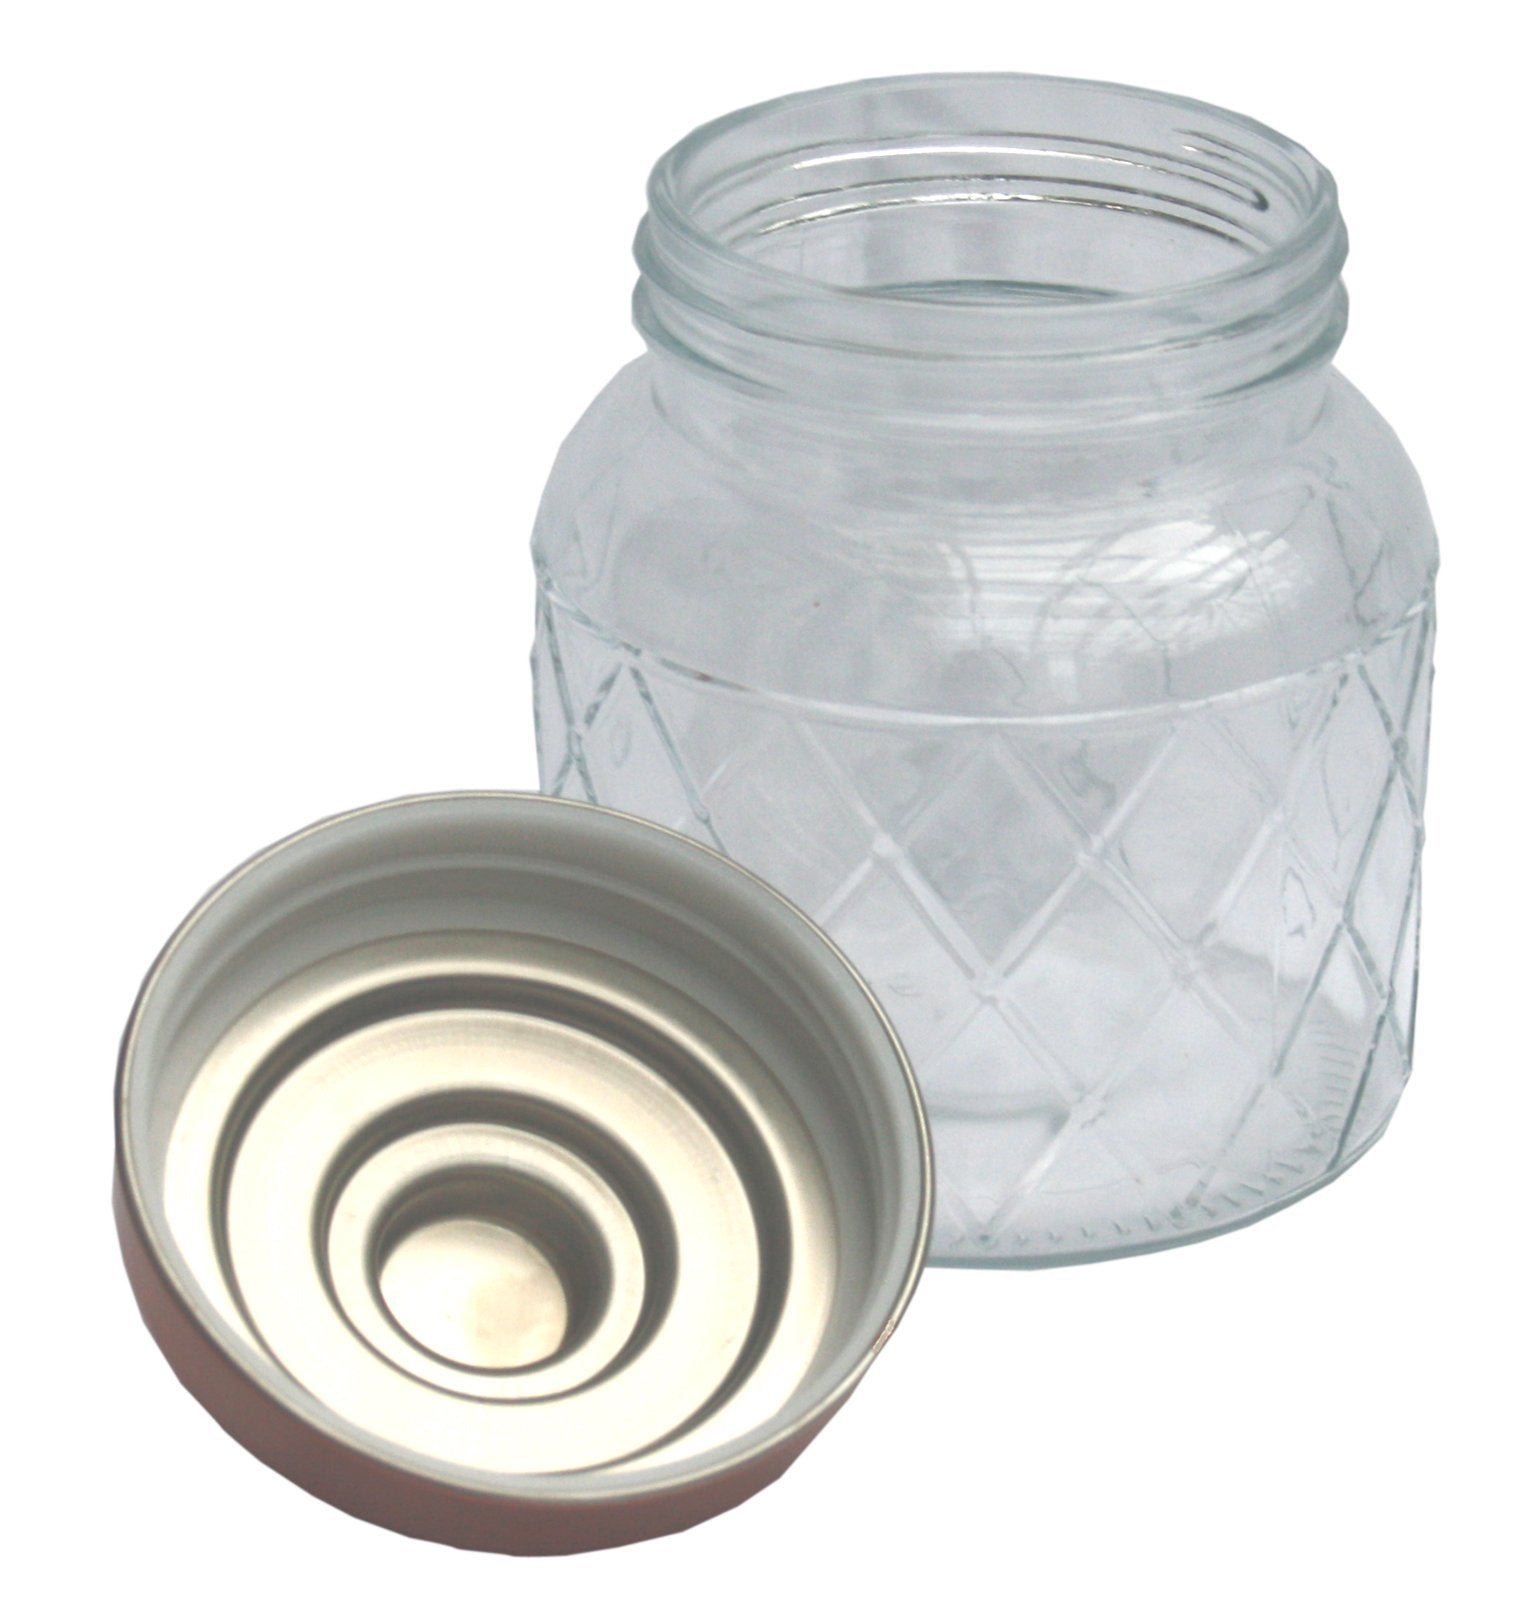 Round Glass Jar With Copper Lid - 5.5 Inch